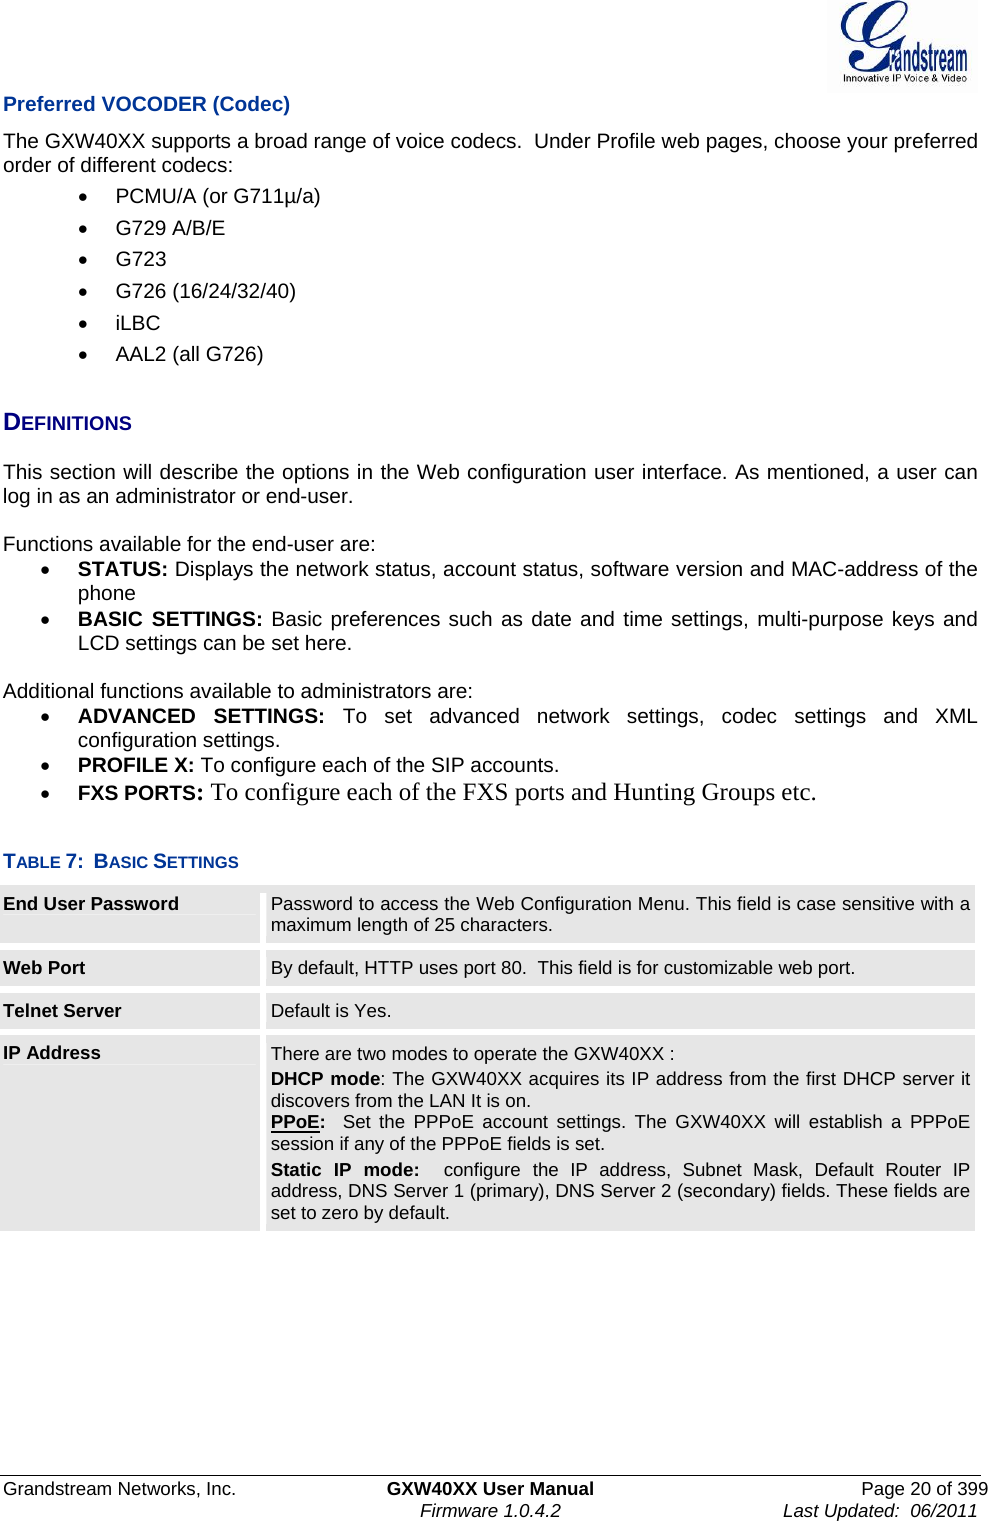  Grandstream Networks, Inc.  GXW40XX User Manual  Page 20 of 399   Firmware 1.0.4.2  Last Updated:  06/2011  Preferred VOCODER (Codec) The GXW40XX supports a broad range of voice codecs.  Under Profile web pages, choose your preferred order of different codecs:   • PCMU/A (or G711µ/a) • G729 A/B/E • G723 • G726 (16/24/32/40) • iLBC •  AAL2 (all G726)  DEFINITIONS  This section will describe the options in the Web configuration user interface. As mentioned, a user can log in as an administrator or end-user.   Functions available for the end-user are: • STATUS: Displays the network status, account status, software version and MAC-address of the phone • BASIC SETTINGS: Basic preferences such as date and time settings, multi-purpose keys and LCD settings can be set here.  Additional functions available to administrators are: • ADVANCED SETTINGS: To set advanced network settings, codec settings and XML configuration settings.  • PROFILE X: To configure each of the SIP accounts.  • FXS PORTS: To configure each of the FXS ports and Hunting Groups etc.  TABLE 7:  BASIC SETTINGS End User Password  Password to access the Web Configuration Menu. This field is case sensitive with a maximum length of 25 characters. Web Port  By default, HTTP uses port 80.  This field is for customizable web port. Telnet Server  Default is Yes.  IP Address  There are two modes to operate the GXW40XX : DHCP mode: The GXW40XX acquires its IP address from the first DHCP server it discovers from the LAN It is on.  PPoE:  Set the PPPoE account settings. The GXW40XX will establish a PPPoE session if any of the PPPoE fields is set. Static IP mode:  configure the IP address, Subnet Mask, Default Router IP address, DNS Server 1 (primary), DNS Server 2 (secondary) fields. These fields are set to zero by default. 